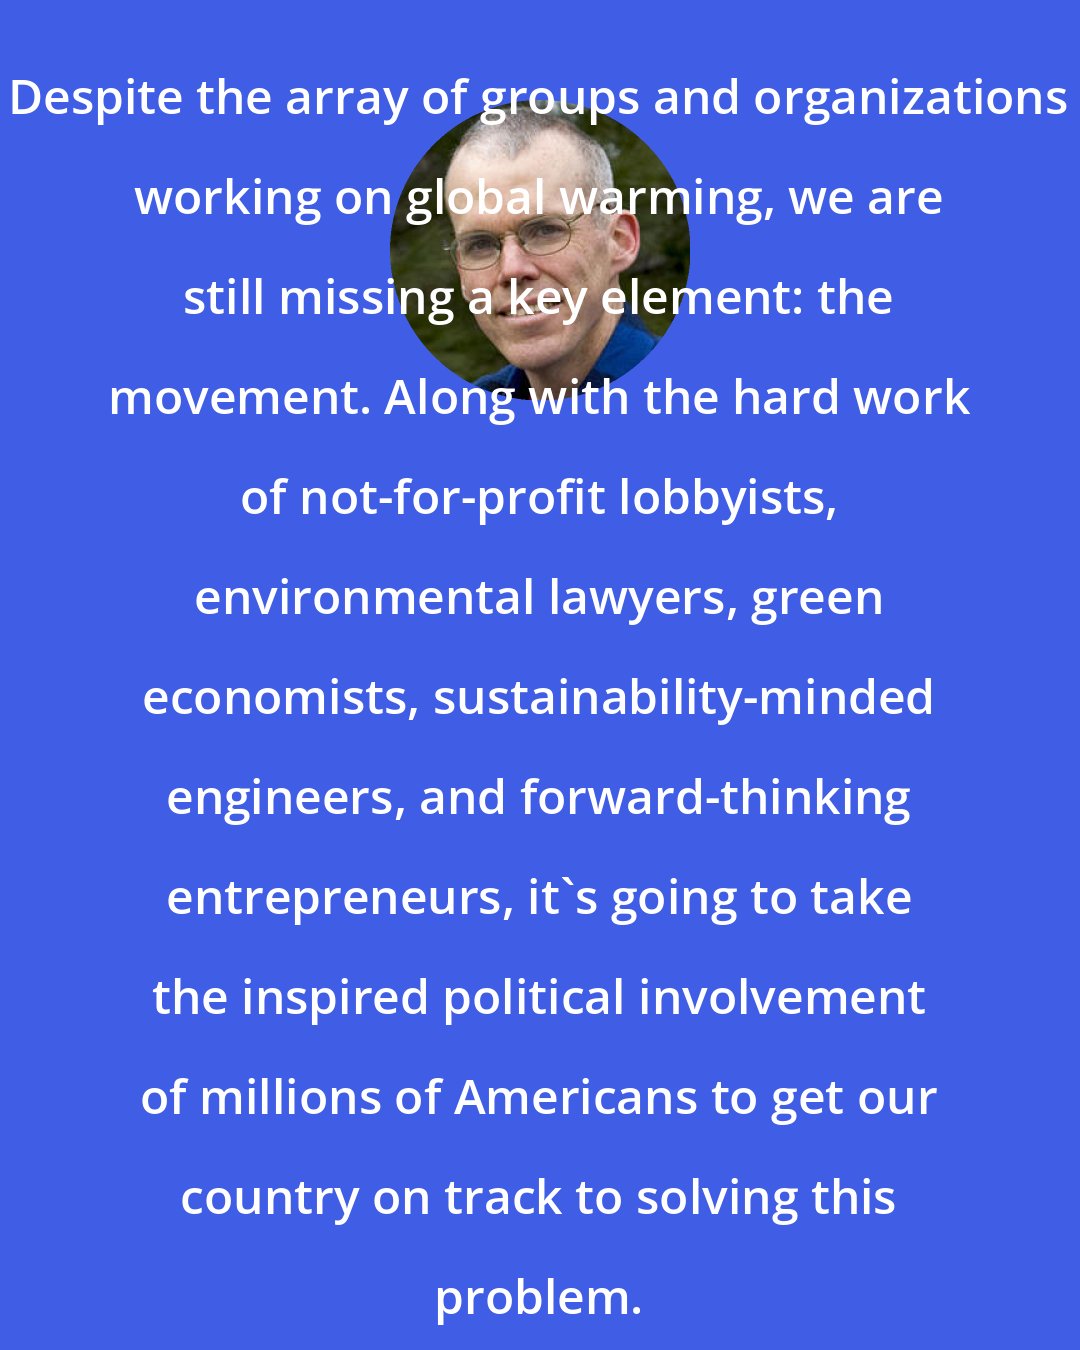 Bill McKibben: Despite the array of groups and organizations working on global warming, we are still missing a key element: the movement. Along with the hard work of not-for-profit lobbyists, environmental lawyers, green economists, sustainability-minded engineers, and forward-thinking entrepreneurs, it's going to take the inspired political involvement of millions of Americans to get our country on track to solving this problem.